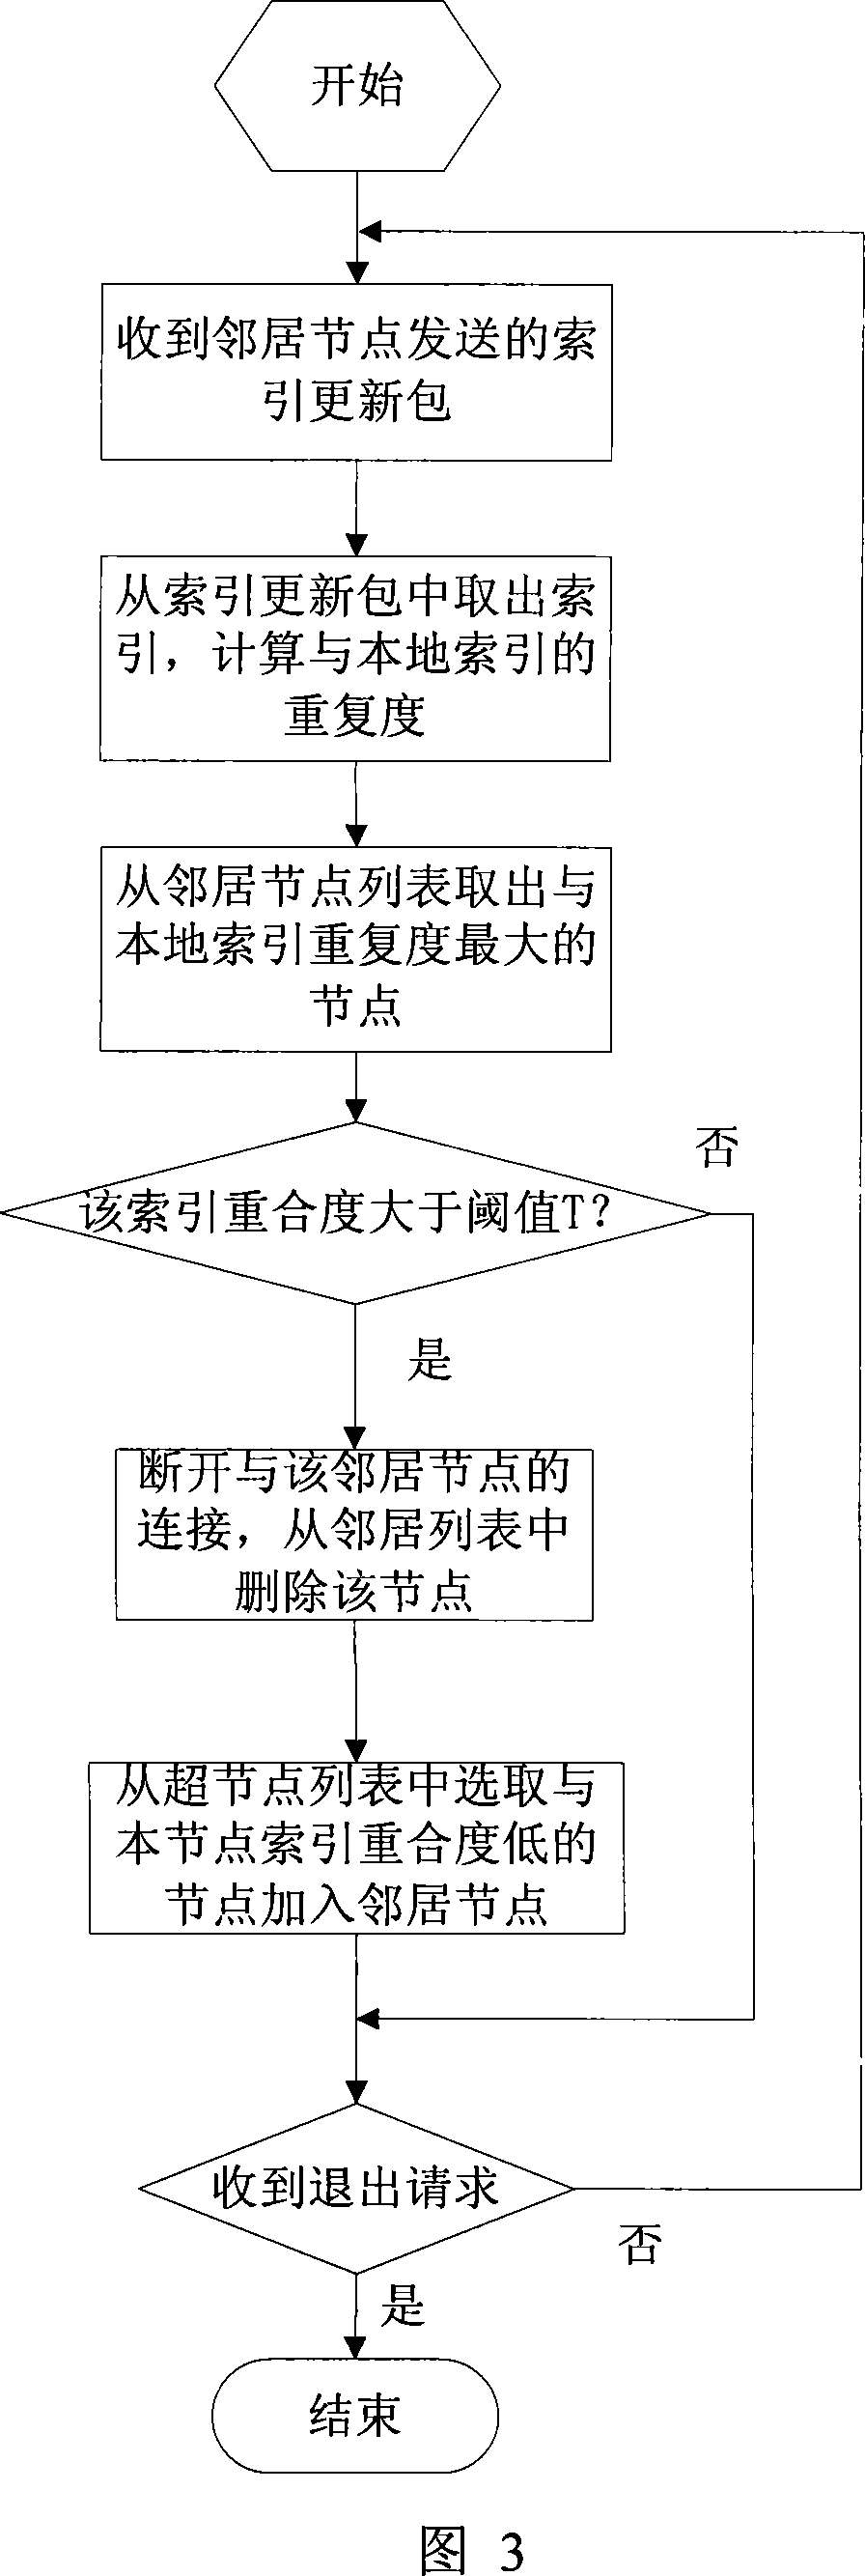 A network organization method of classification retrieval in peer-to-peer network video sharing system